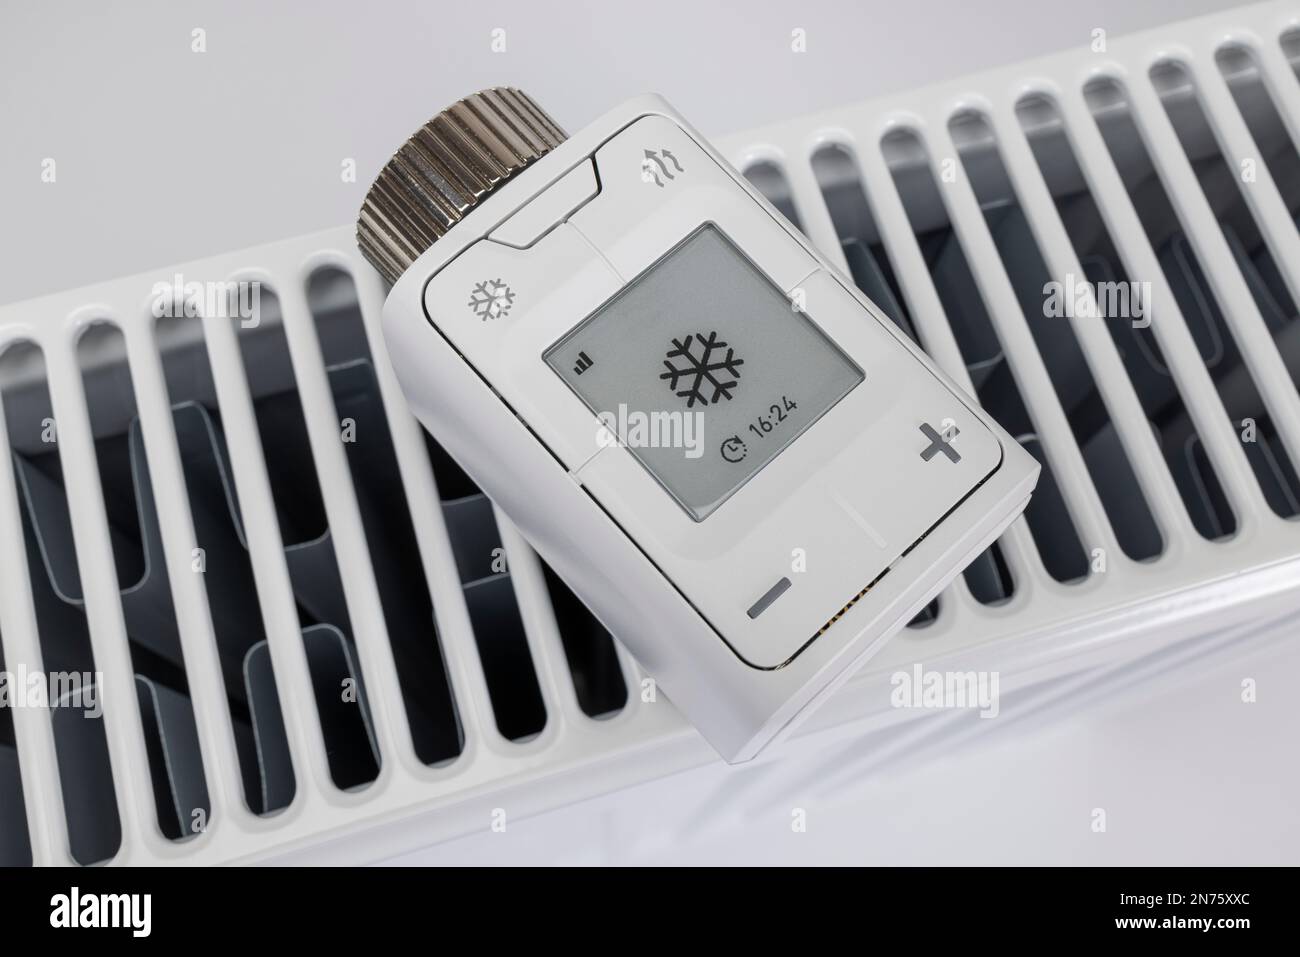 https://c8.alamy.com/comp/2N75XXC/wlan-radiator-thermostat-fritz!-dect-302-display-shows-snowflakes-icon-frost-protection-about-c-on-radiator-icon-image-change-thermostat-smart-home-technology-networking-digital-energy-costs-rising-heating-costs-white-background-2N75XXC.jpg